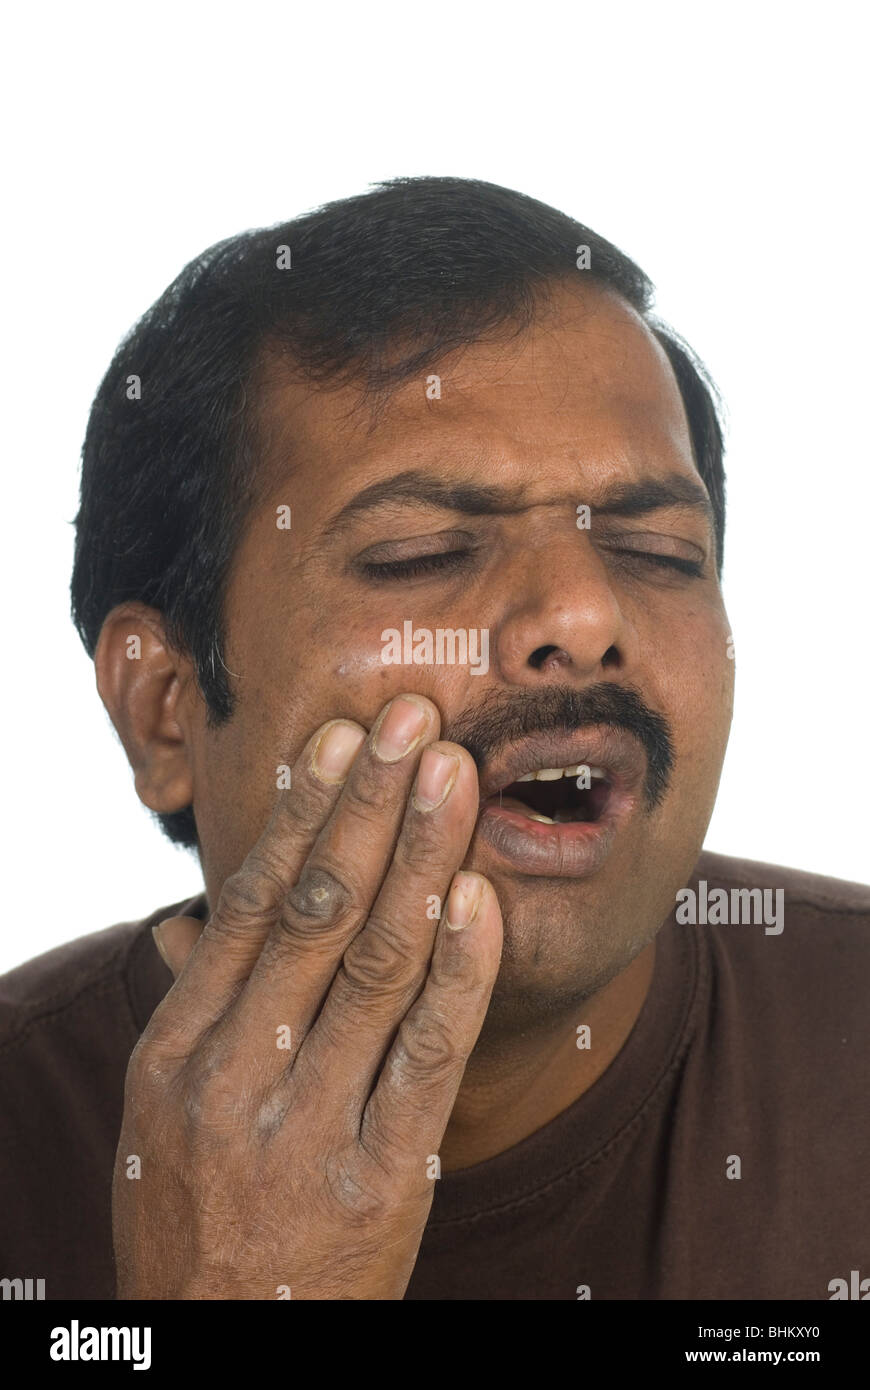 Indian man hand over mouth with tooth pain Stock Photo